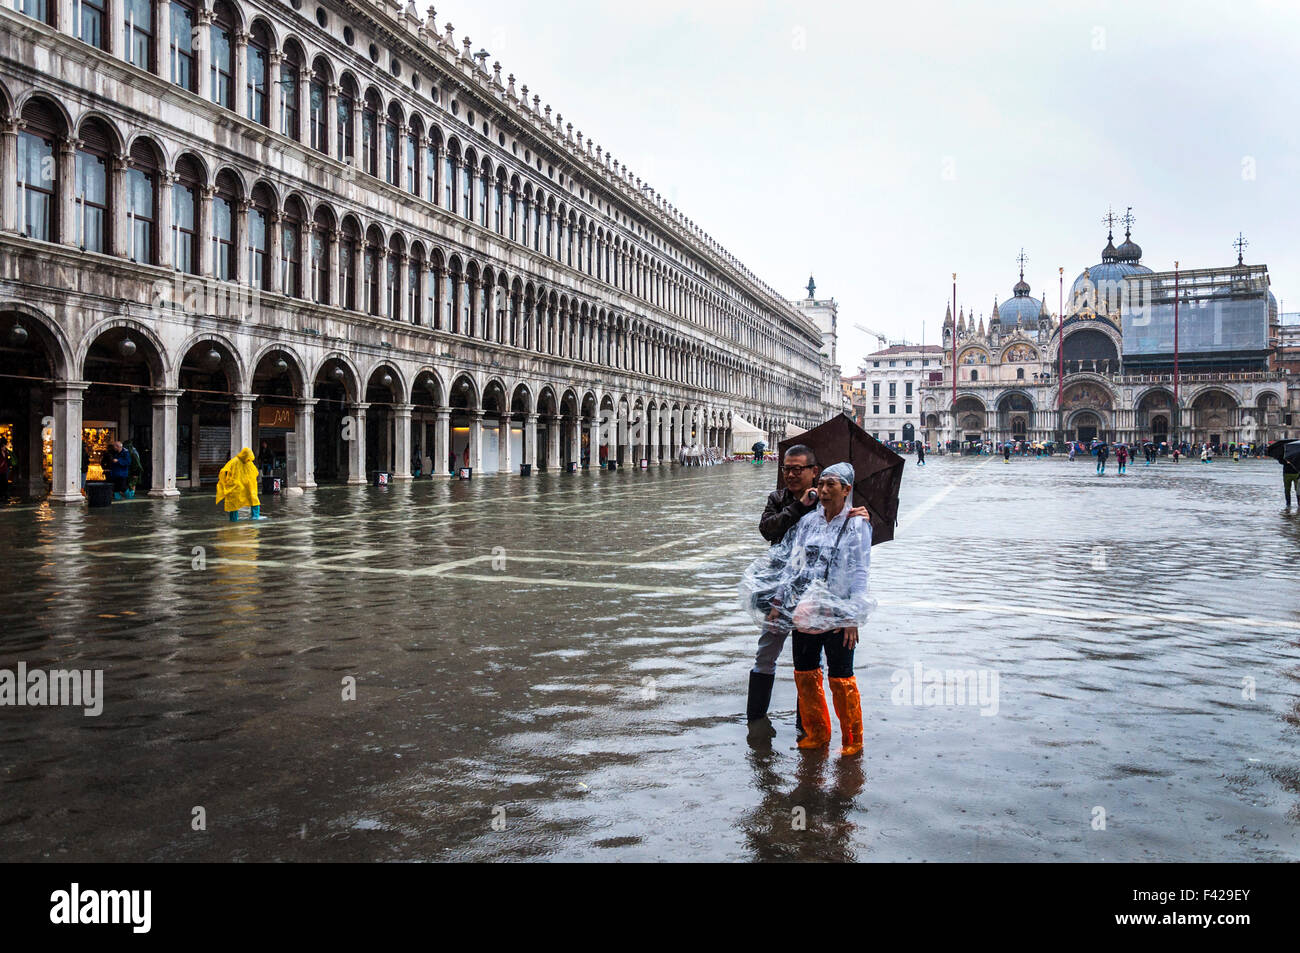 St Marks Square, Venice, Italy. 14th October 2015. A couple of tourists in Piazza San Marco pose for a photo during Acqua alta or 'high water' the exceptional tide peaks that occur periodically in the northern Adriatic Sea. Photo by: Credit:  Richard Wayman/Alamy Live News Stock Photo